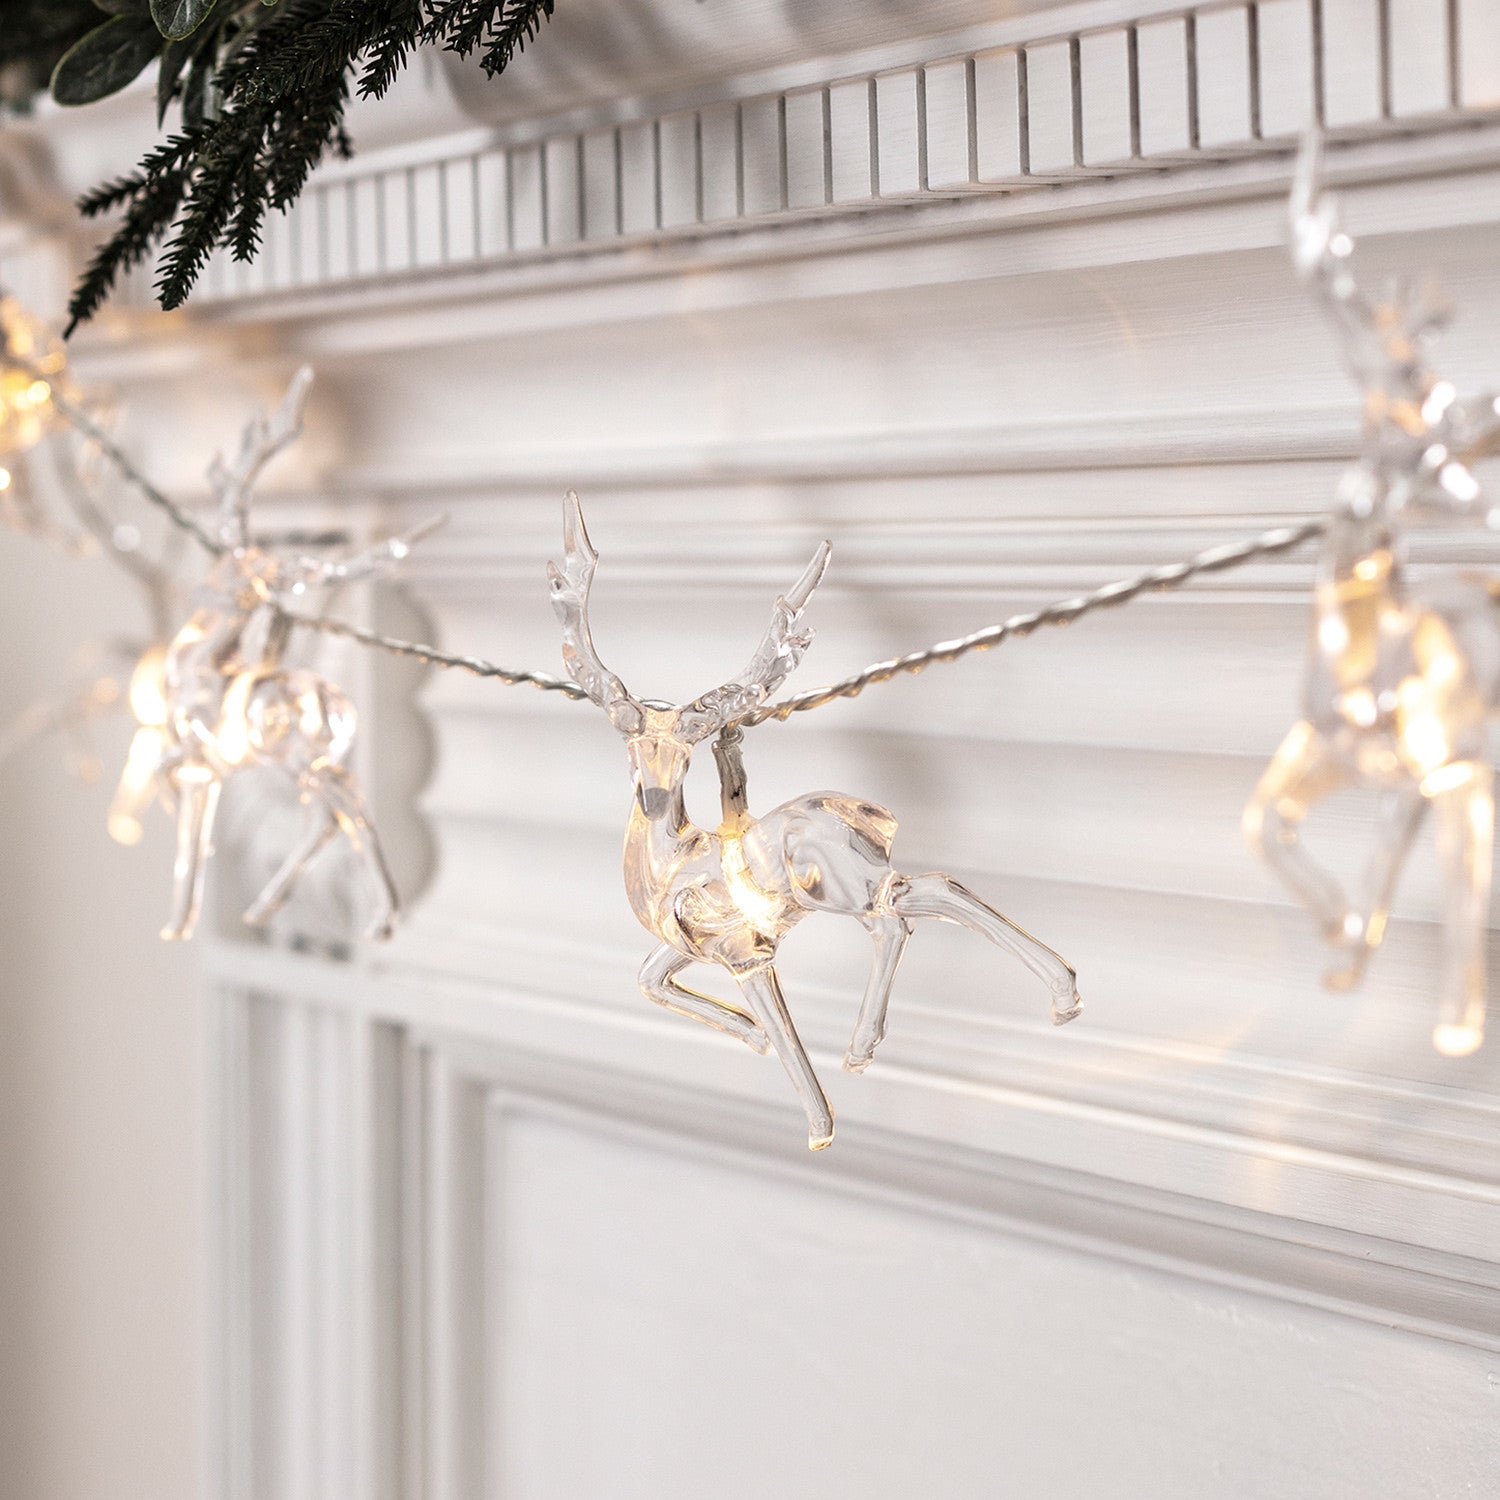 Photos - Other Jewellery Warm 10  White Reindeer Battery Christmas Fairy Lights 